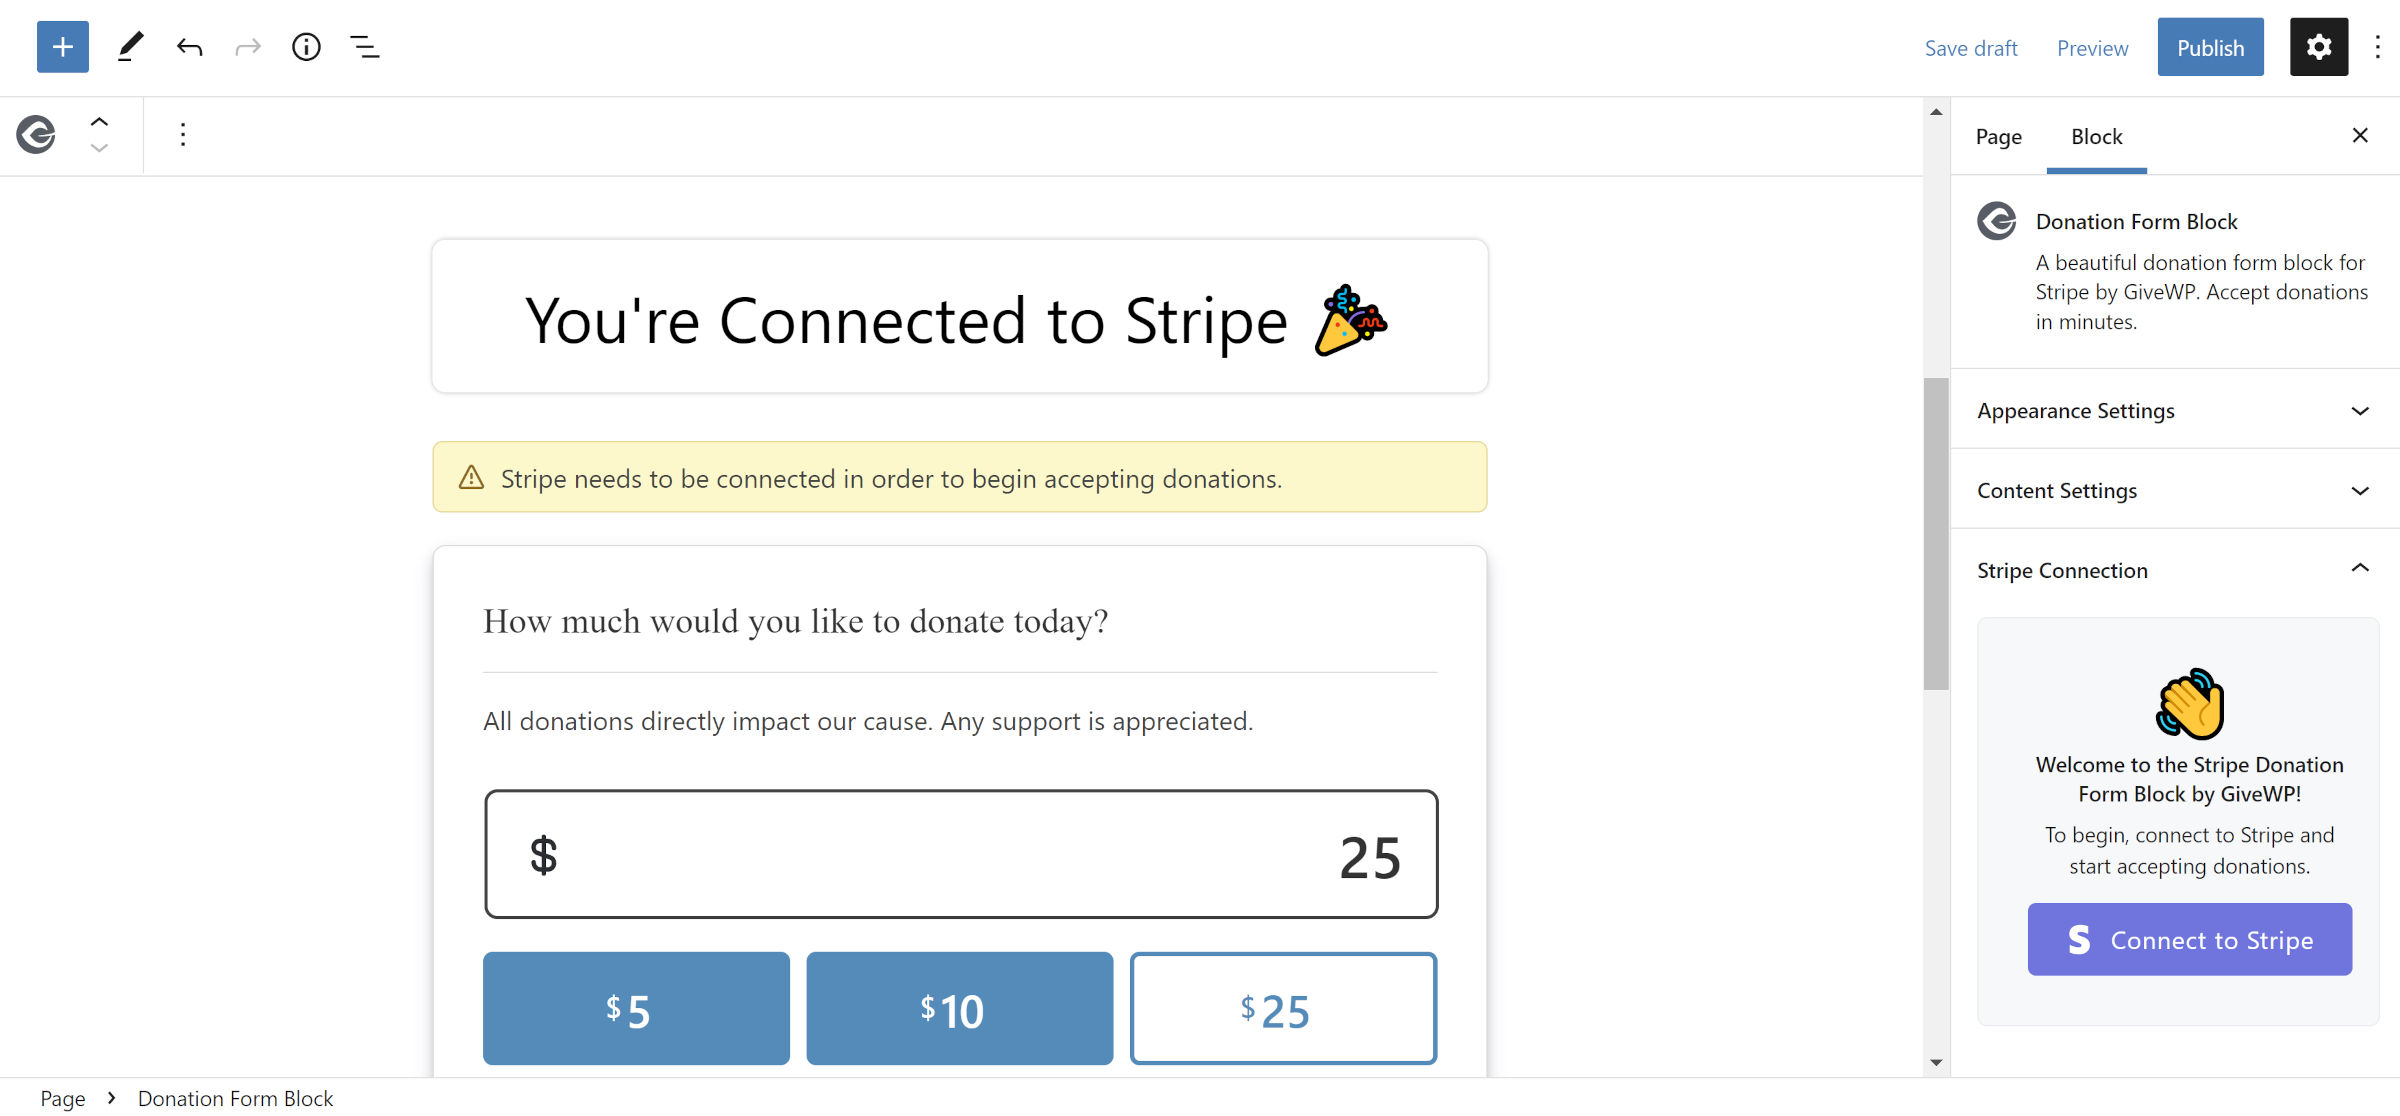 Donation form in the WordPress editor in the middle of connecting it to Stripe.